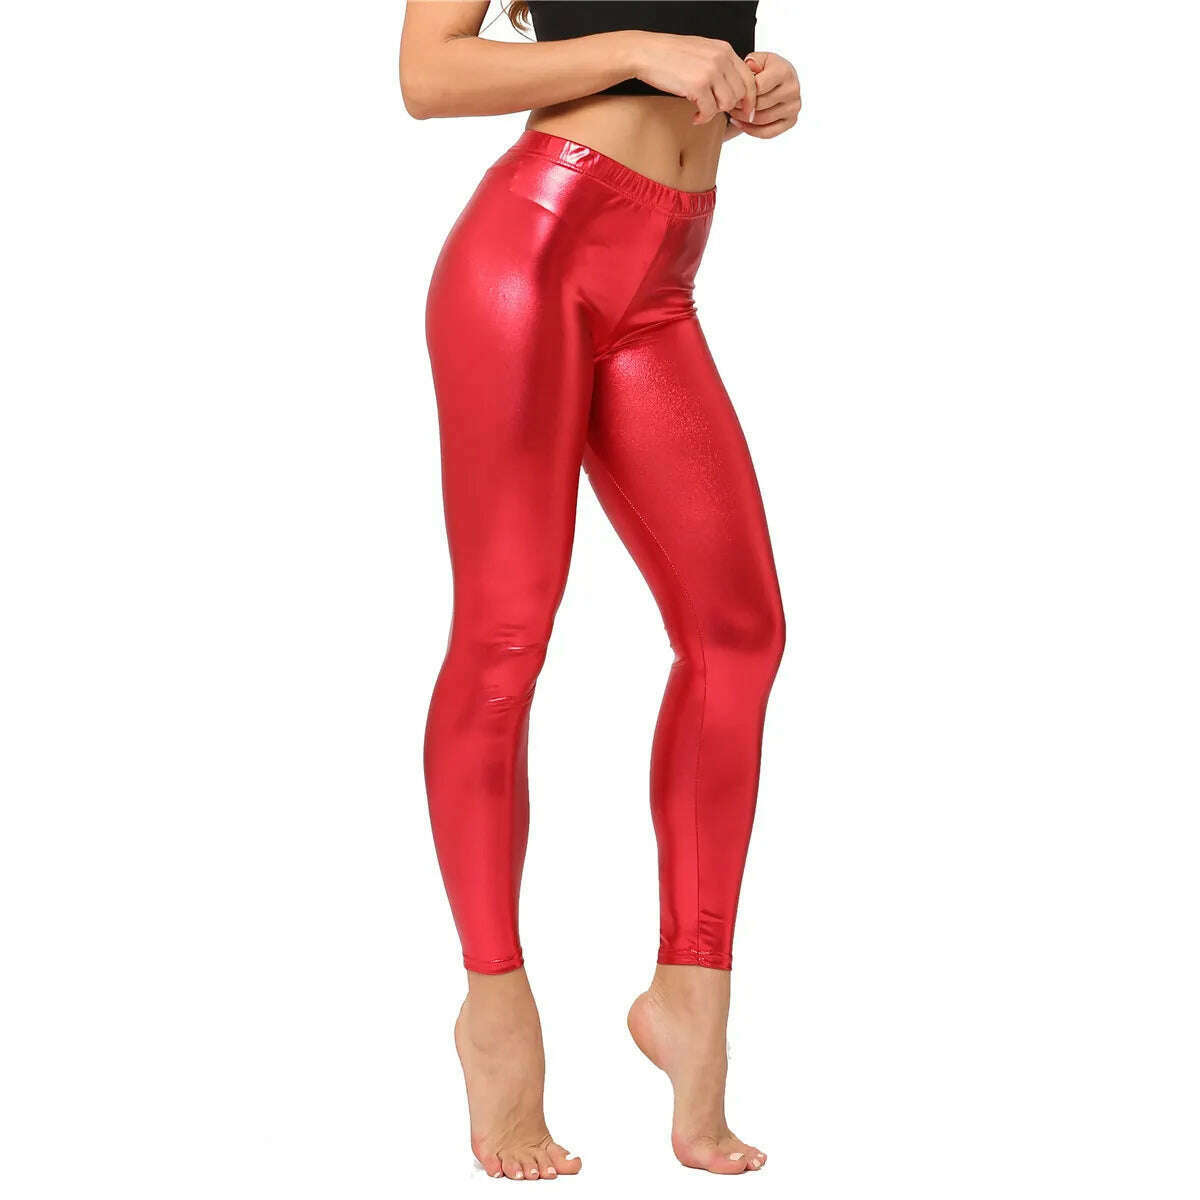 KIMLUD, Metallic Color PU Leggings Women Faux Leather Pants Dancing Party Pant Sexy Night Club Skinny Costume Pants Tight Trousers, Red / One size 50kg below, KIMLUD Women's Clothes